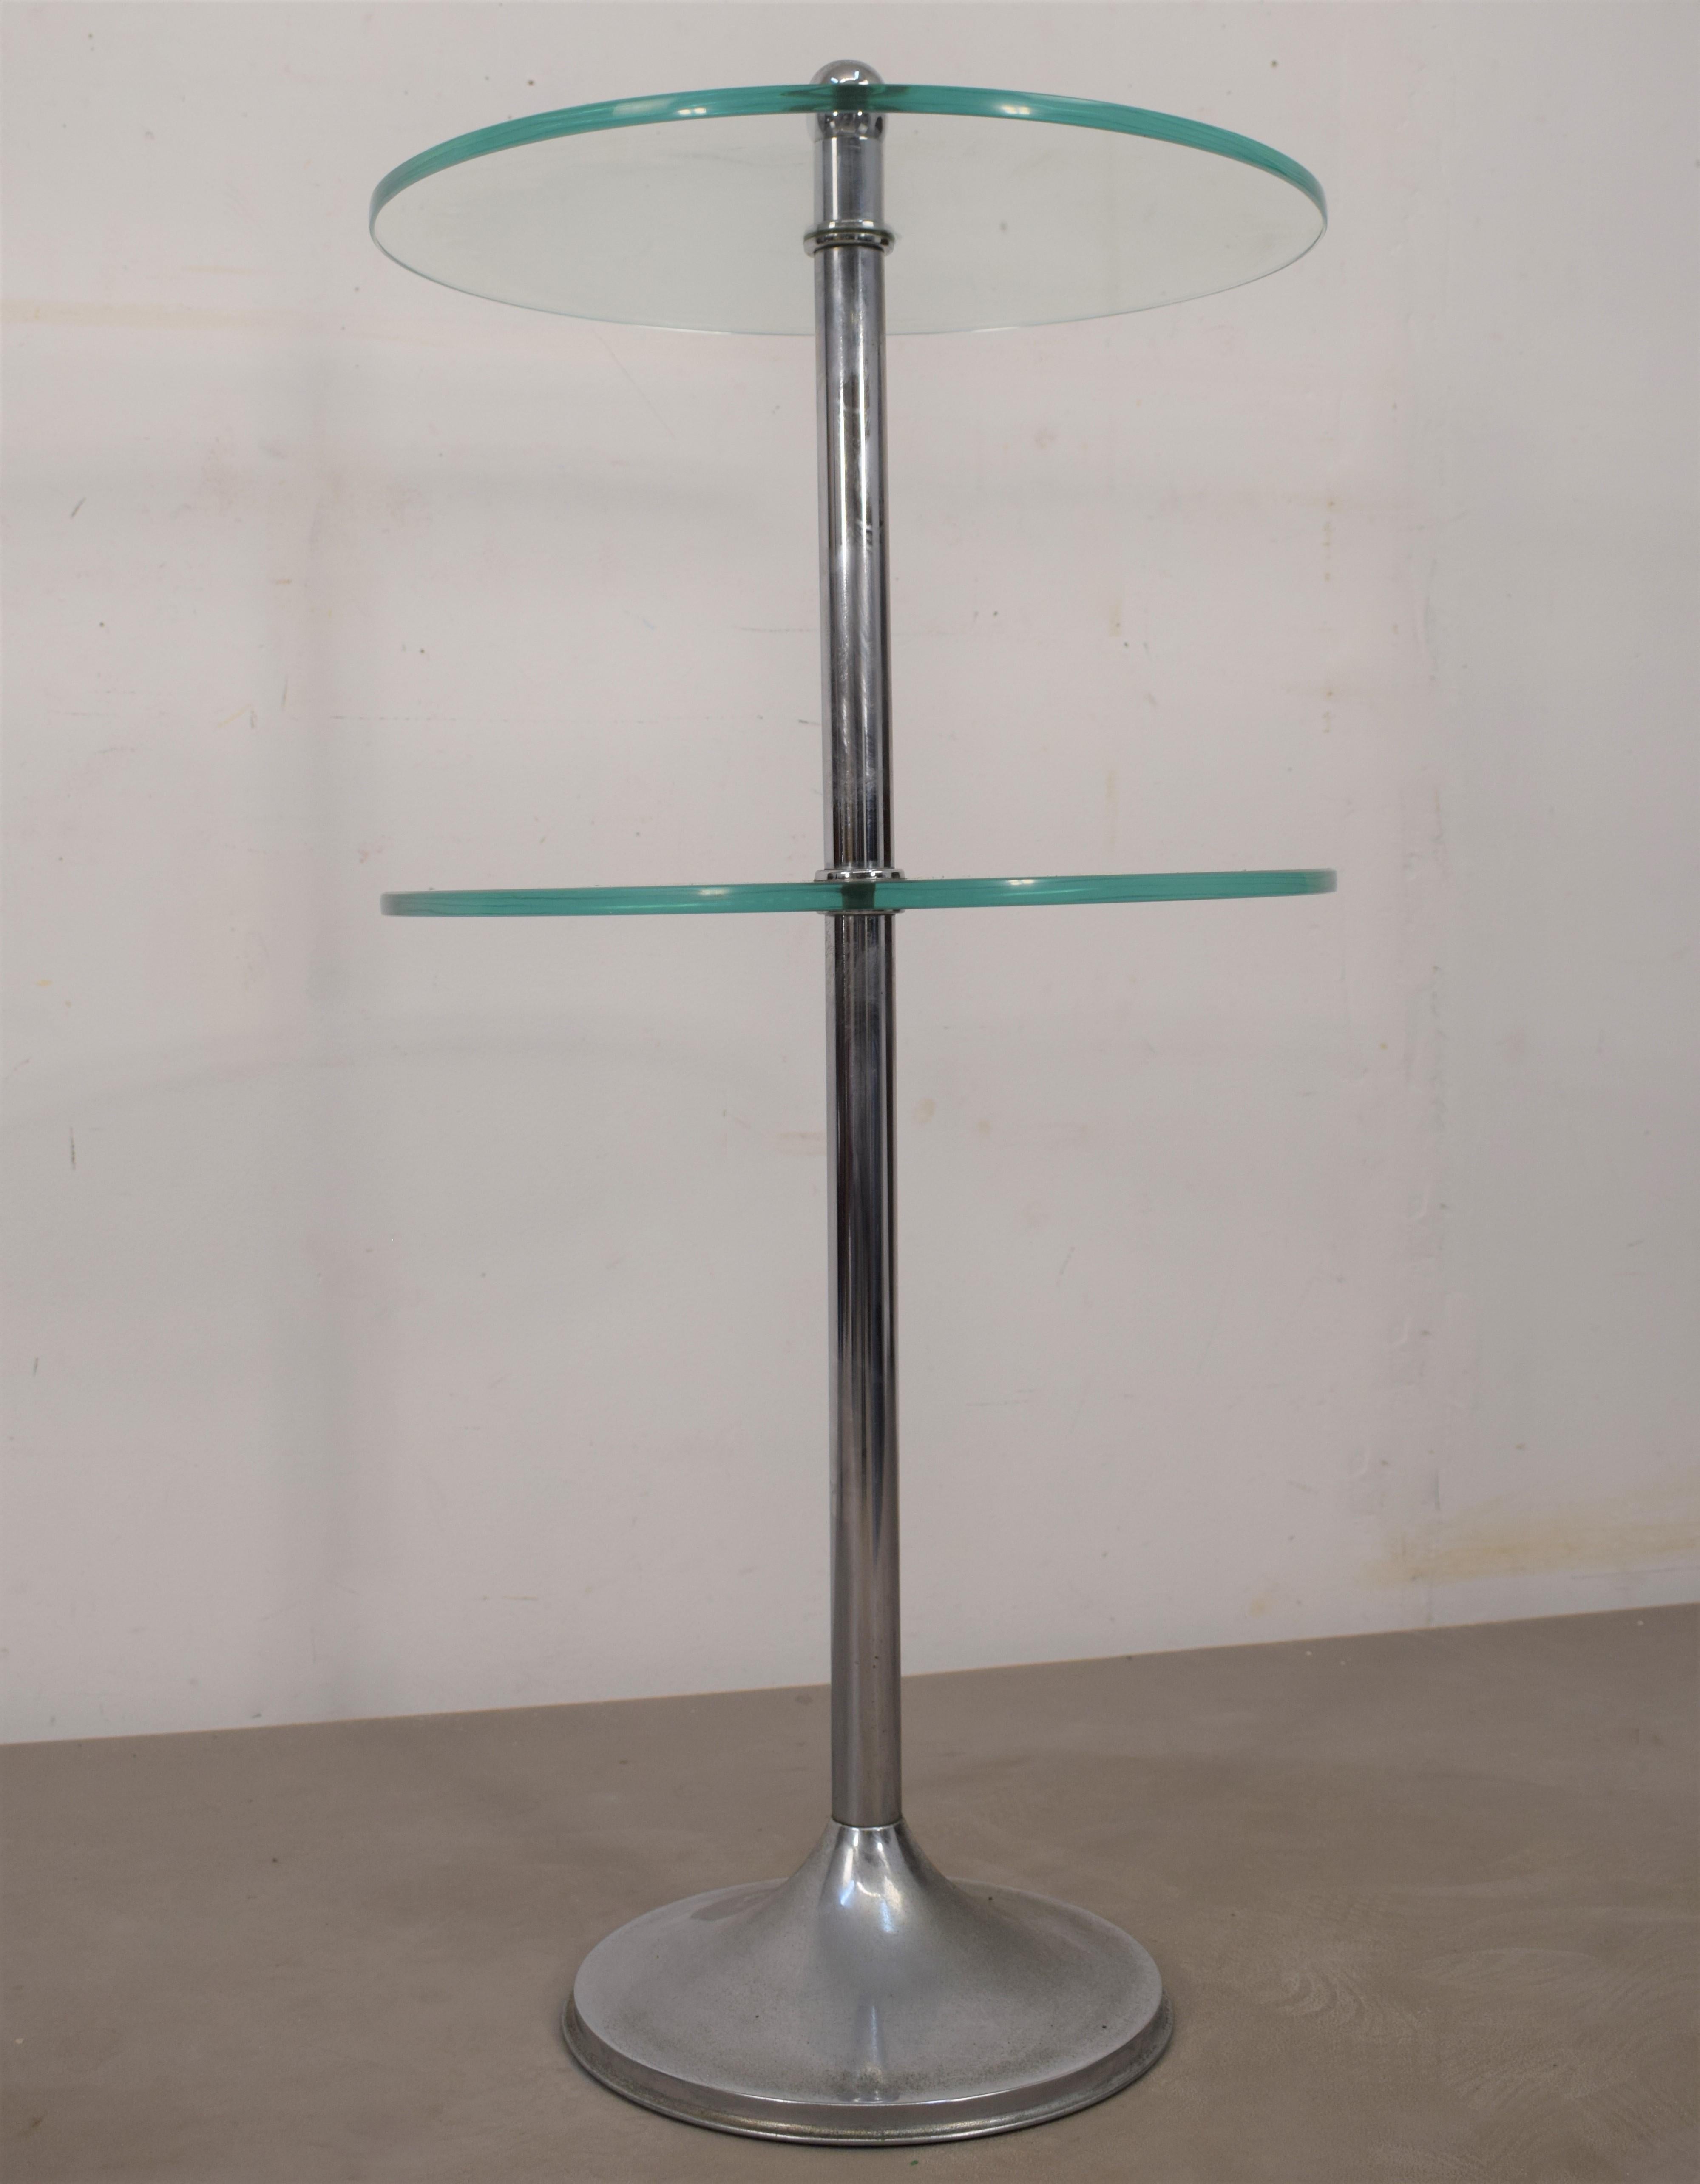 Fontana Arte coffee table, 1970s.
Dimensions: H=76 cm; D= 40 cm.
Small defect in a glass.